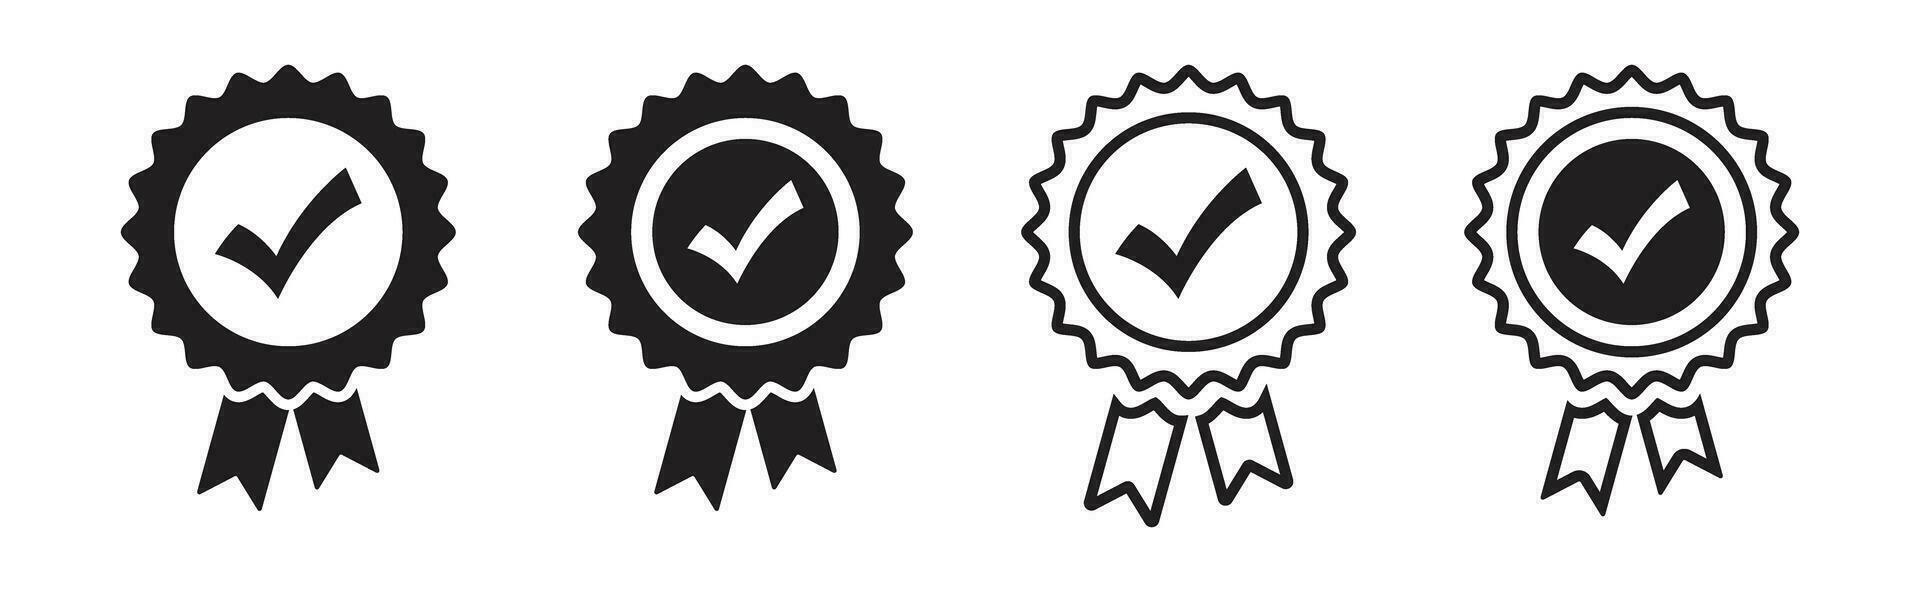 Approved or certified medal icon. Certified badge. Approval check symbol collection. Vector Icon.